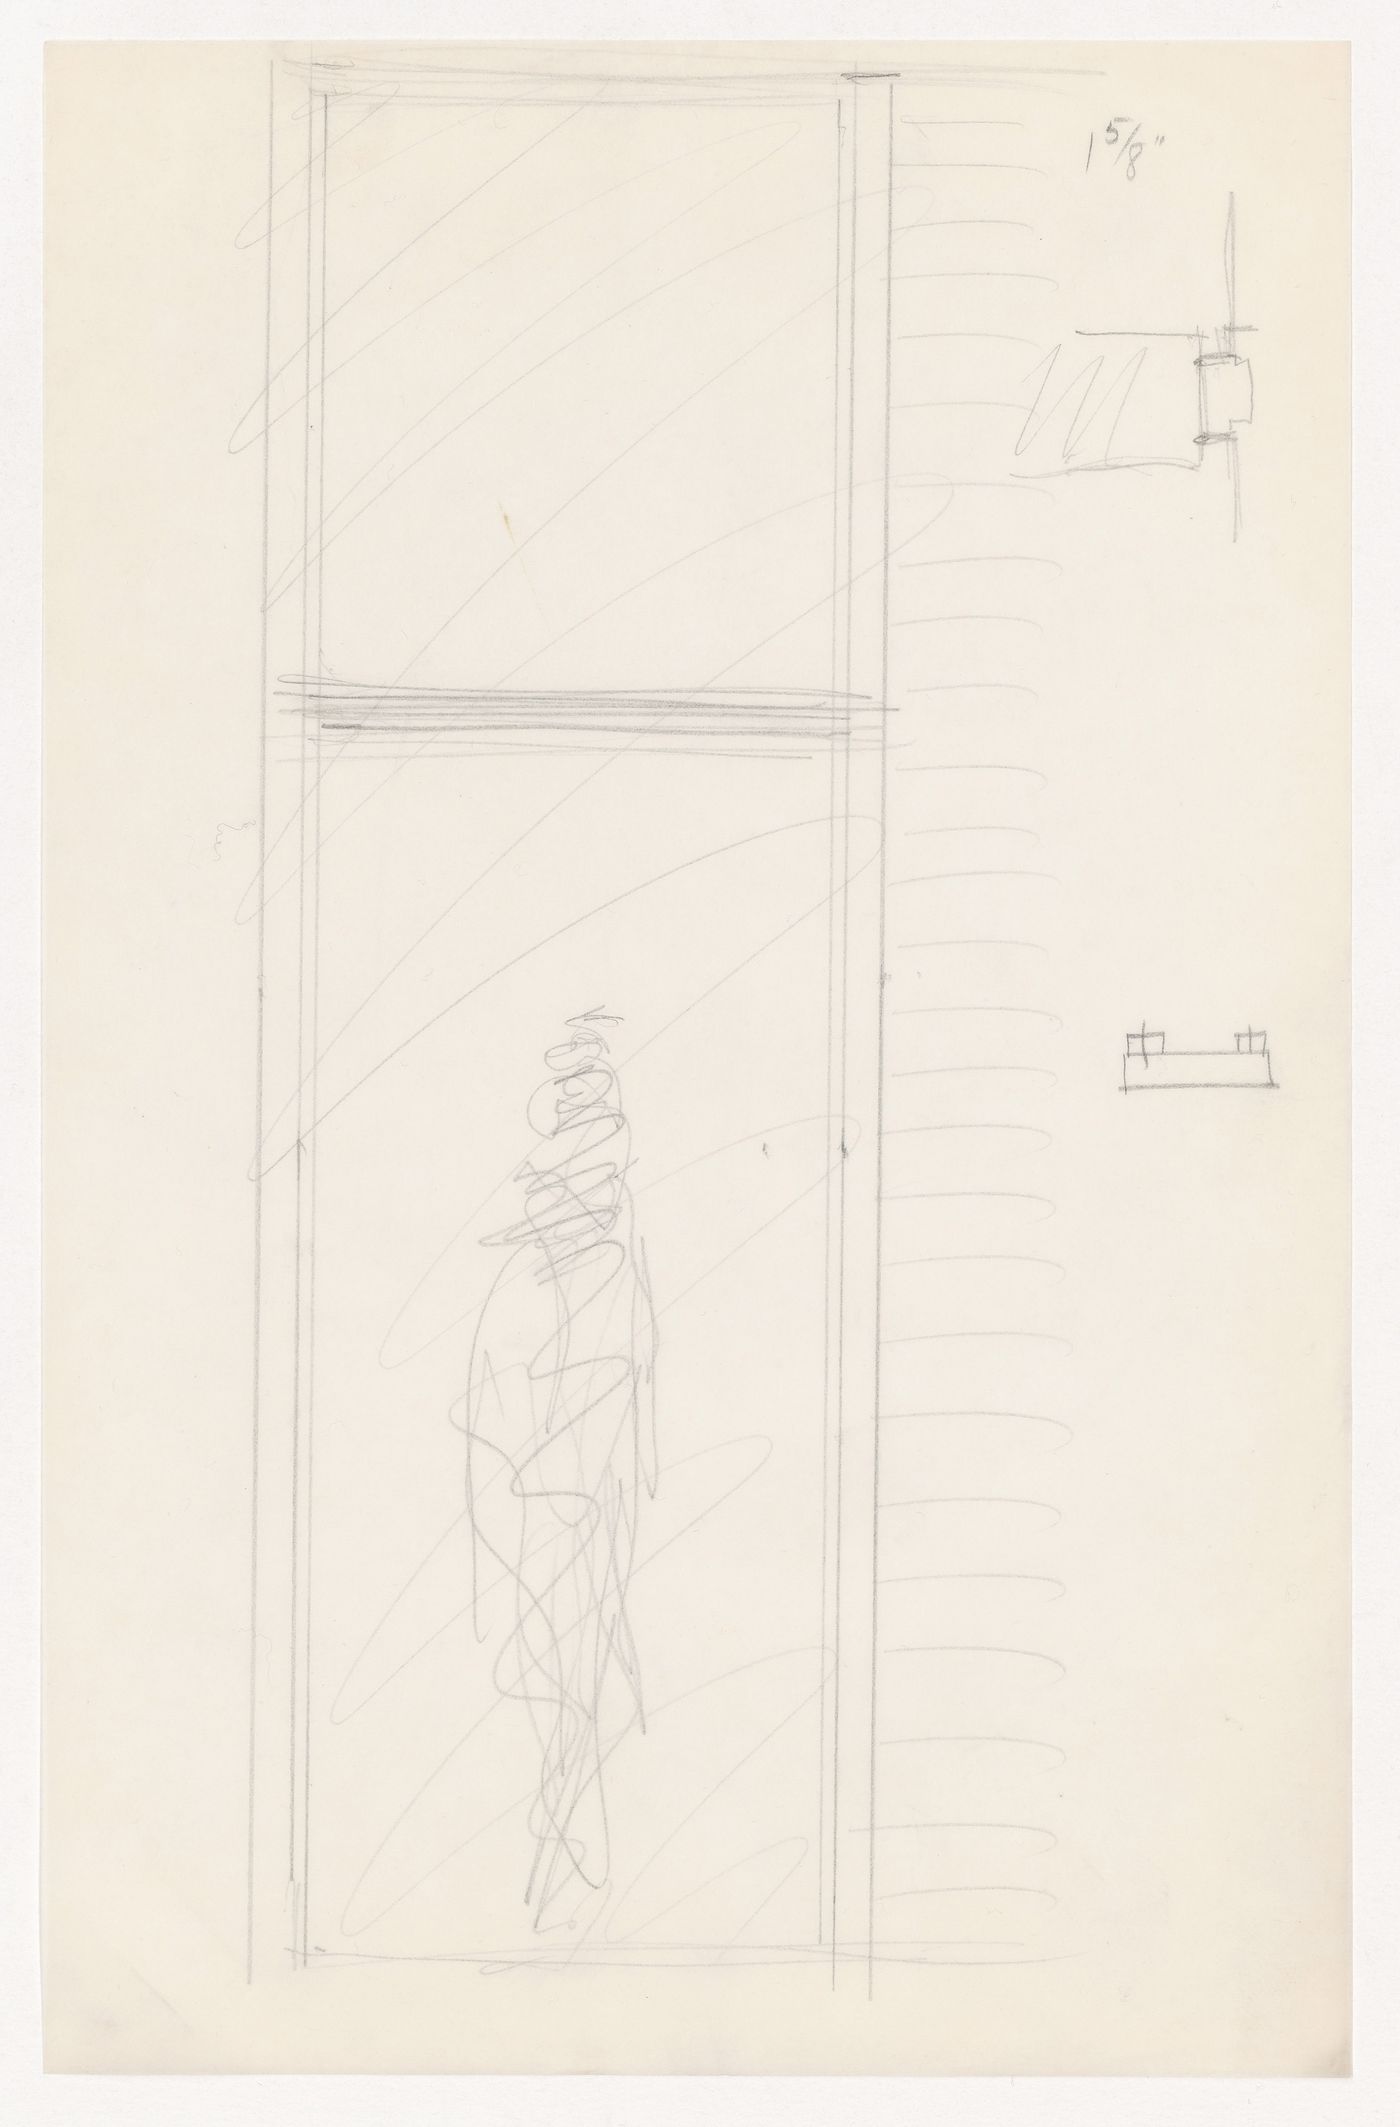 Partial sketch elevation showing window glazing for the Metallurgy Building, Illinois Institute of Technology, Chicago, with a sketch sectional detail and an unidentified sketch